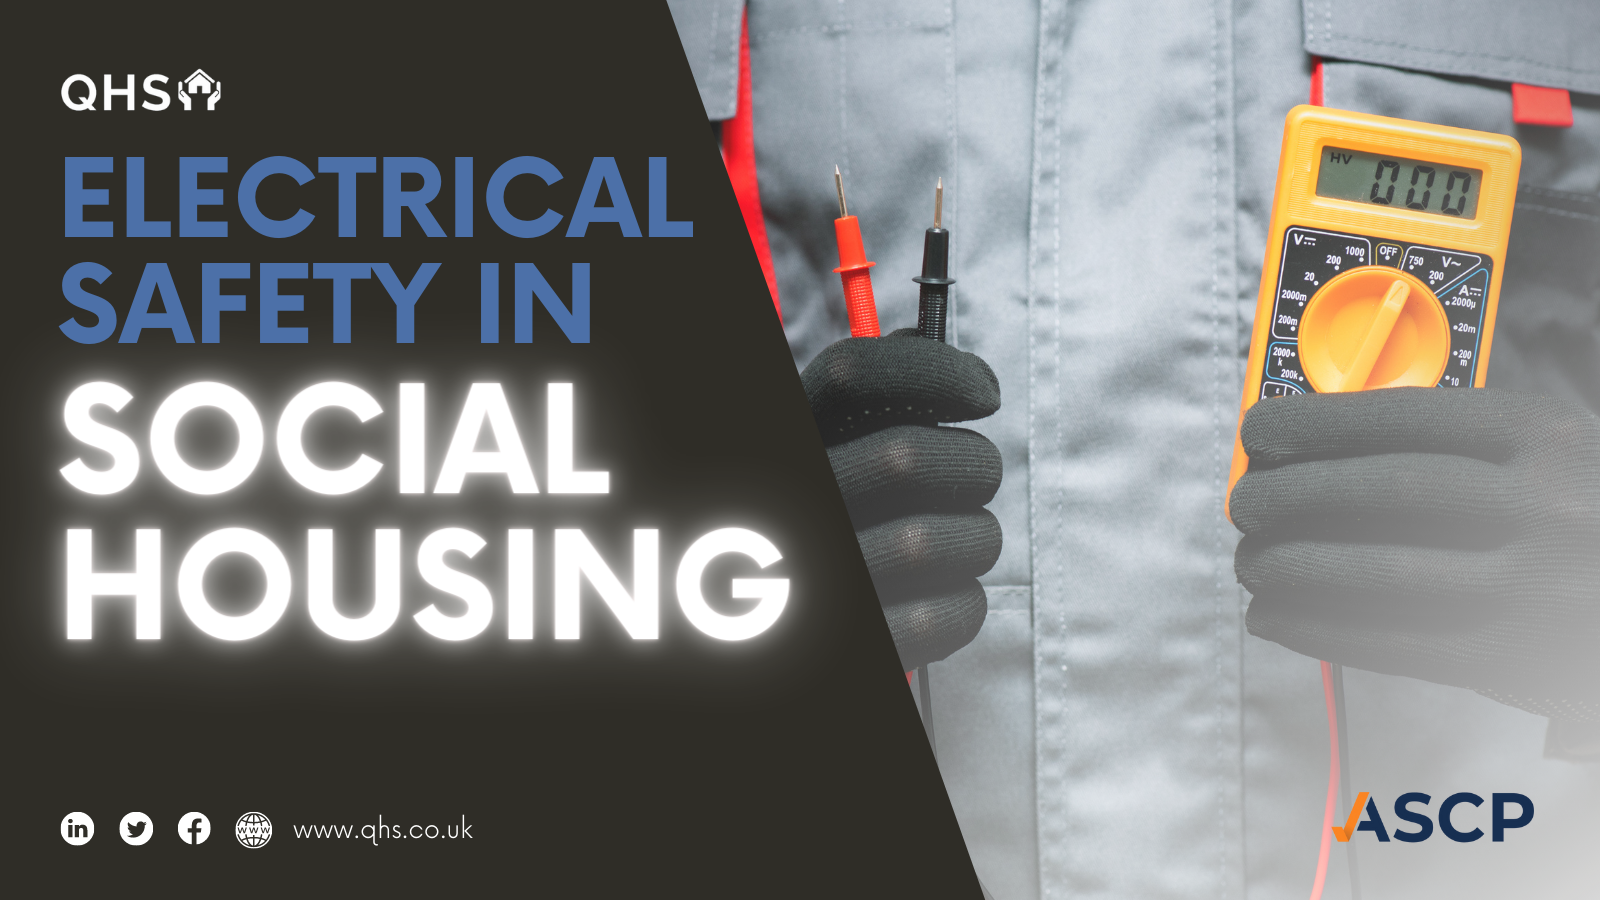 Electrical Safety in Social Housing - Transformational Change